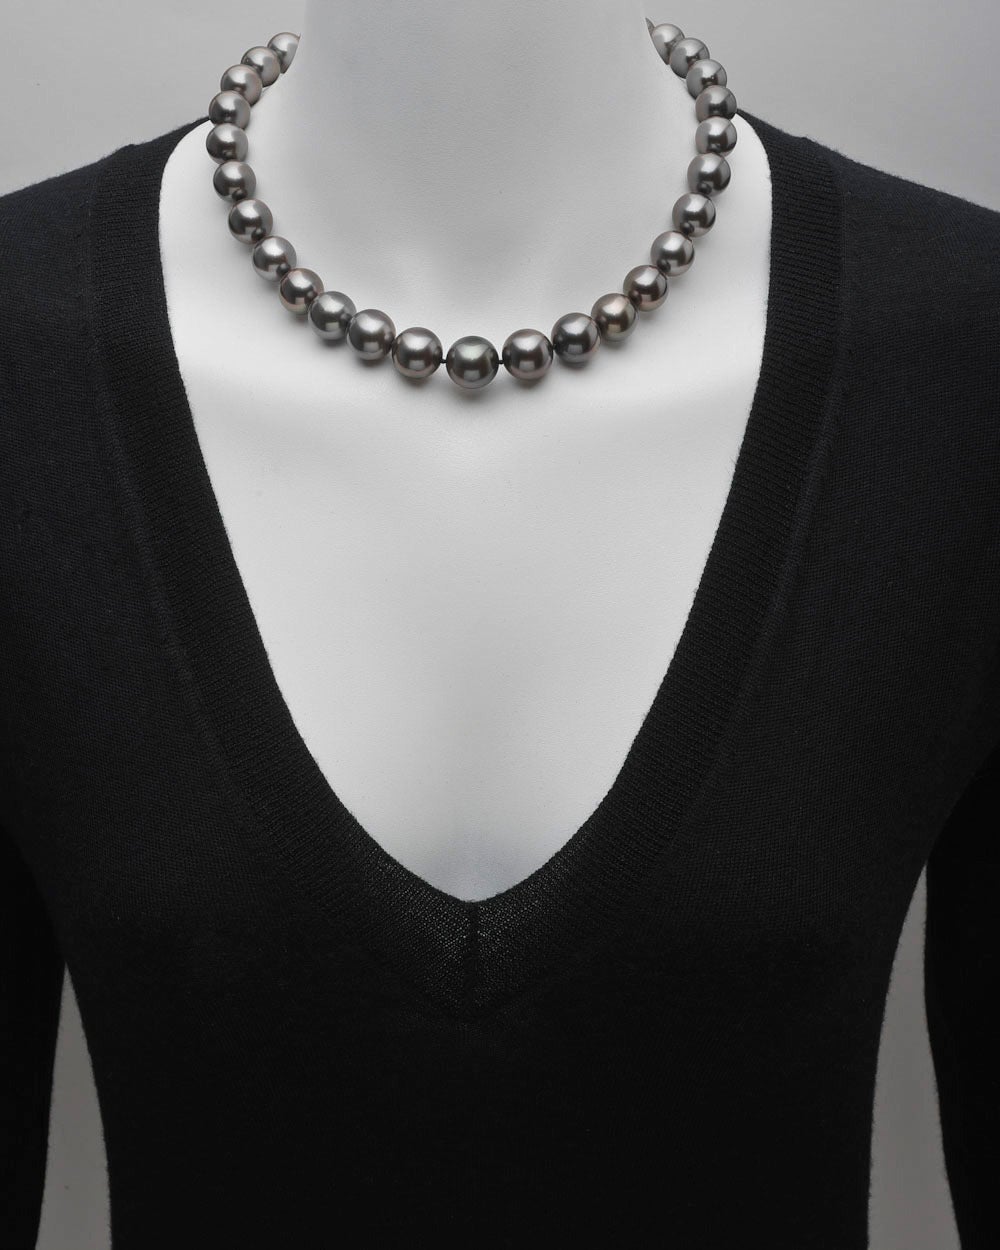 Single strand black cultured pearl necklace, composed of 33 pearls, ranging from 12-14.8mm in diameter, strung on a silk cord, with a pavé diamond ball clasp, set with approximately 4.98 total carats of diamonds and mounted in platinum. 18.5